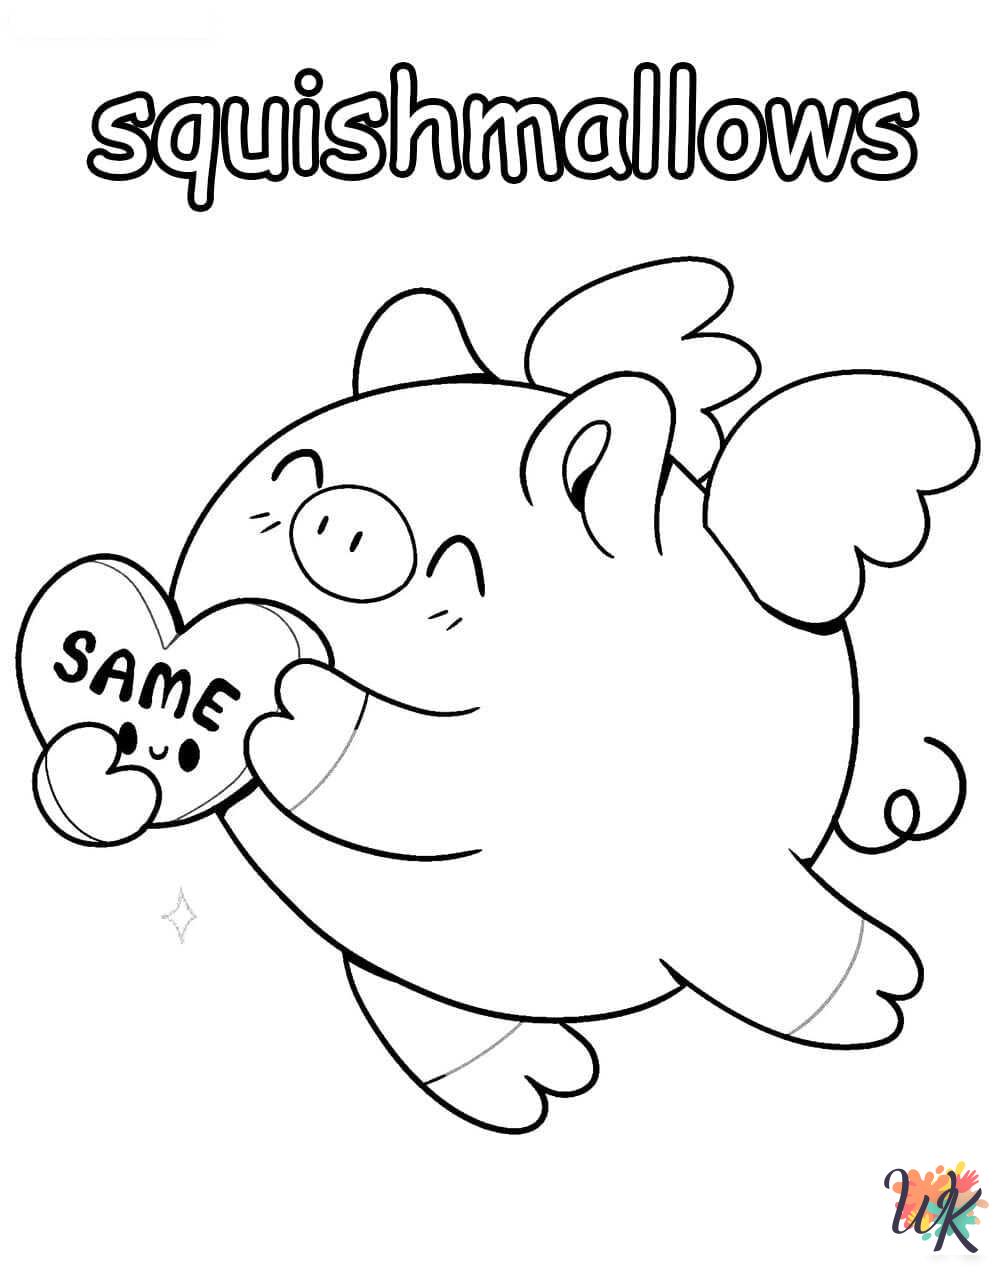 Squishmallows coloring book pages